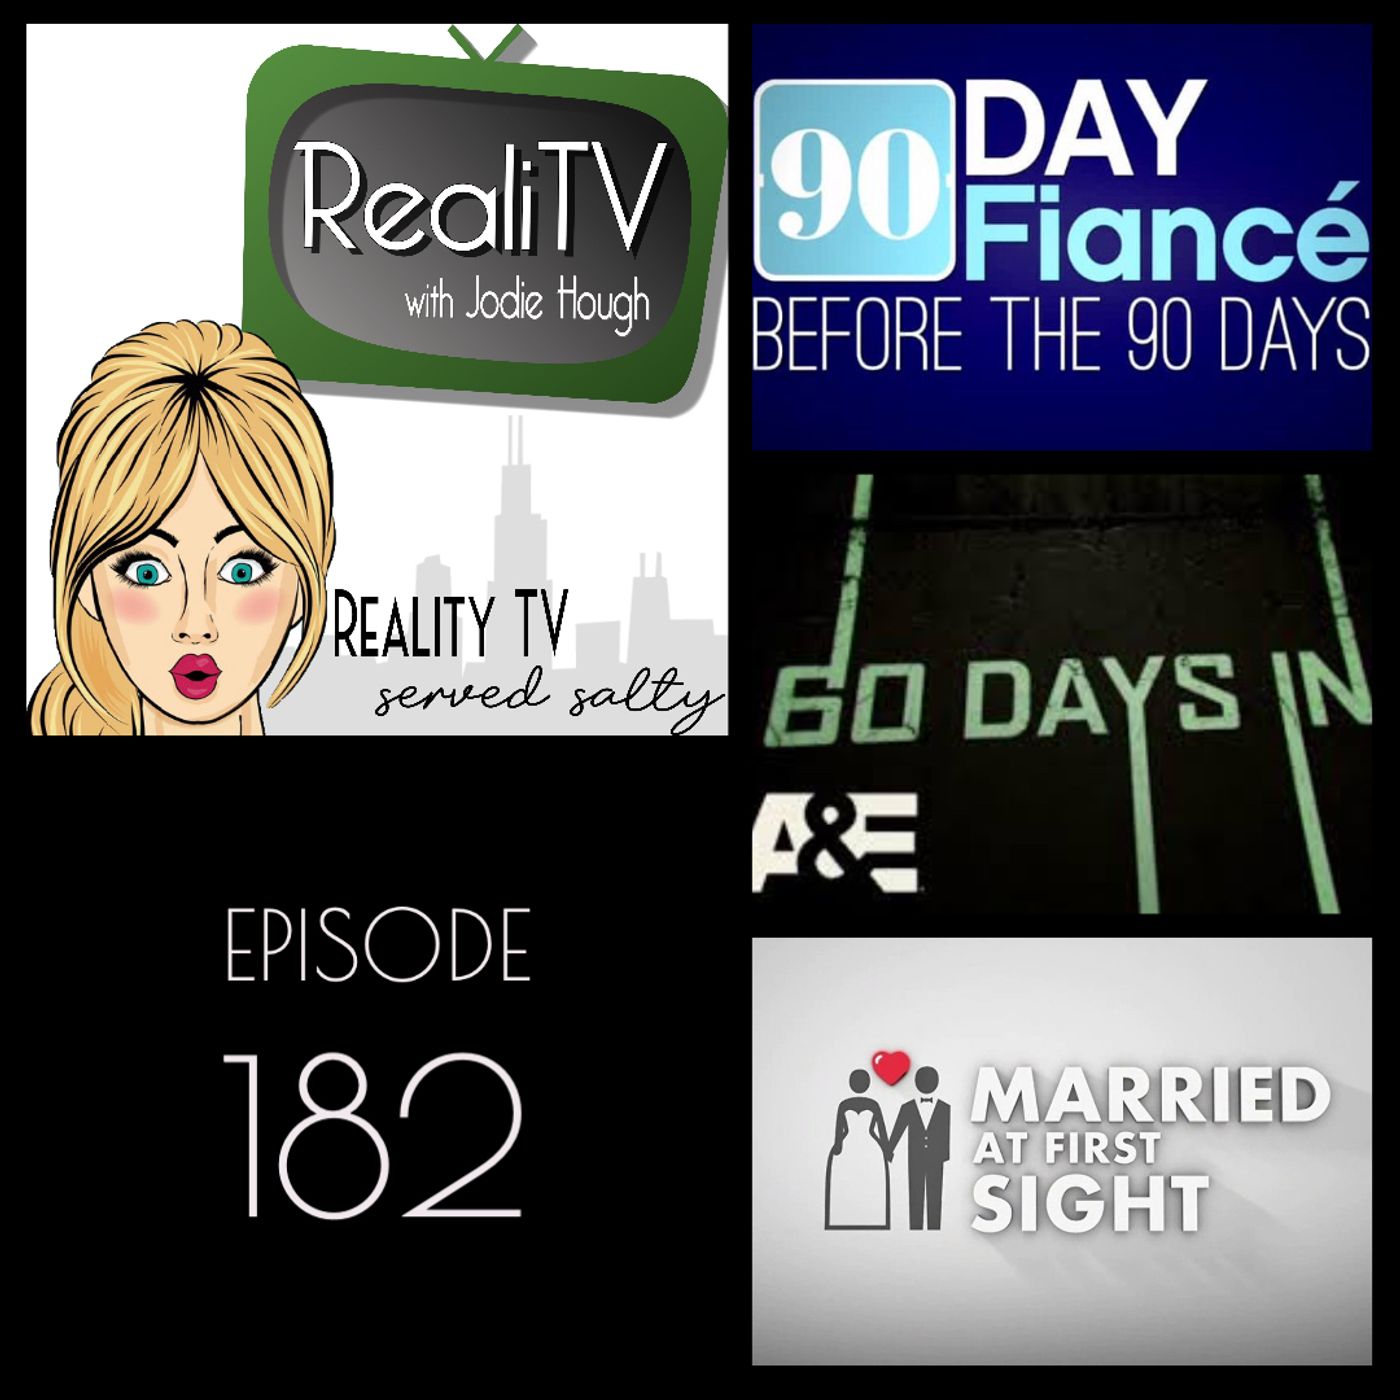 182: 90 Day Fiance, Married at First Sight & 60 Days In